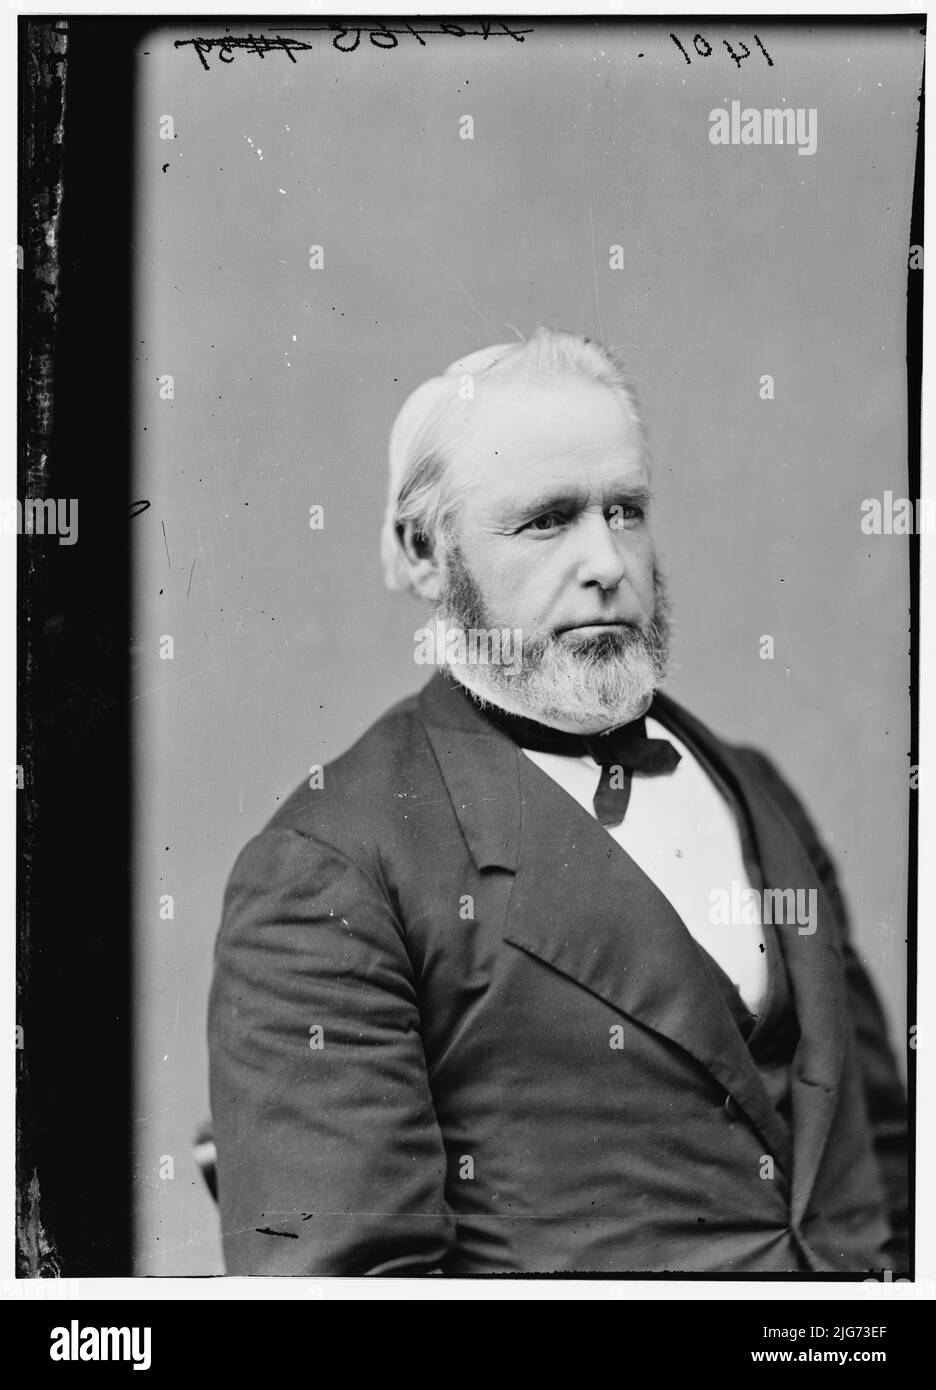 Burleigh, Hon. John H. of Maine, between 1870 and 1880.  [Politician, sailor, manufacturer and banker]. Stock Photo